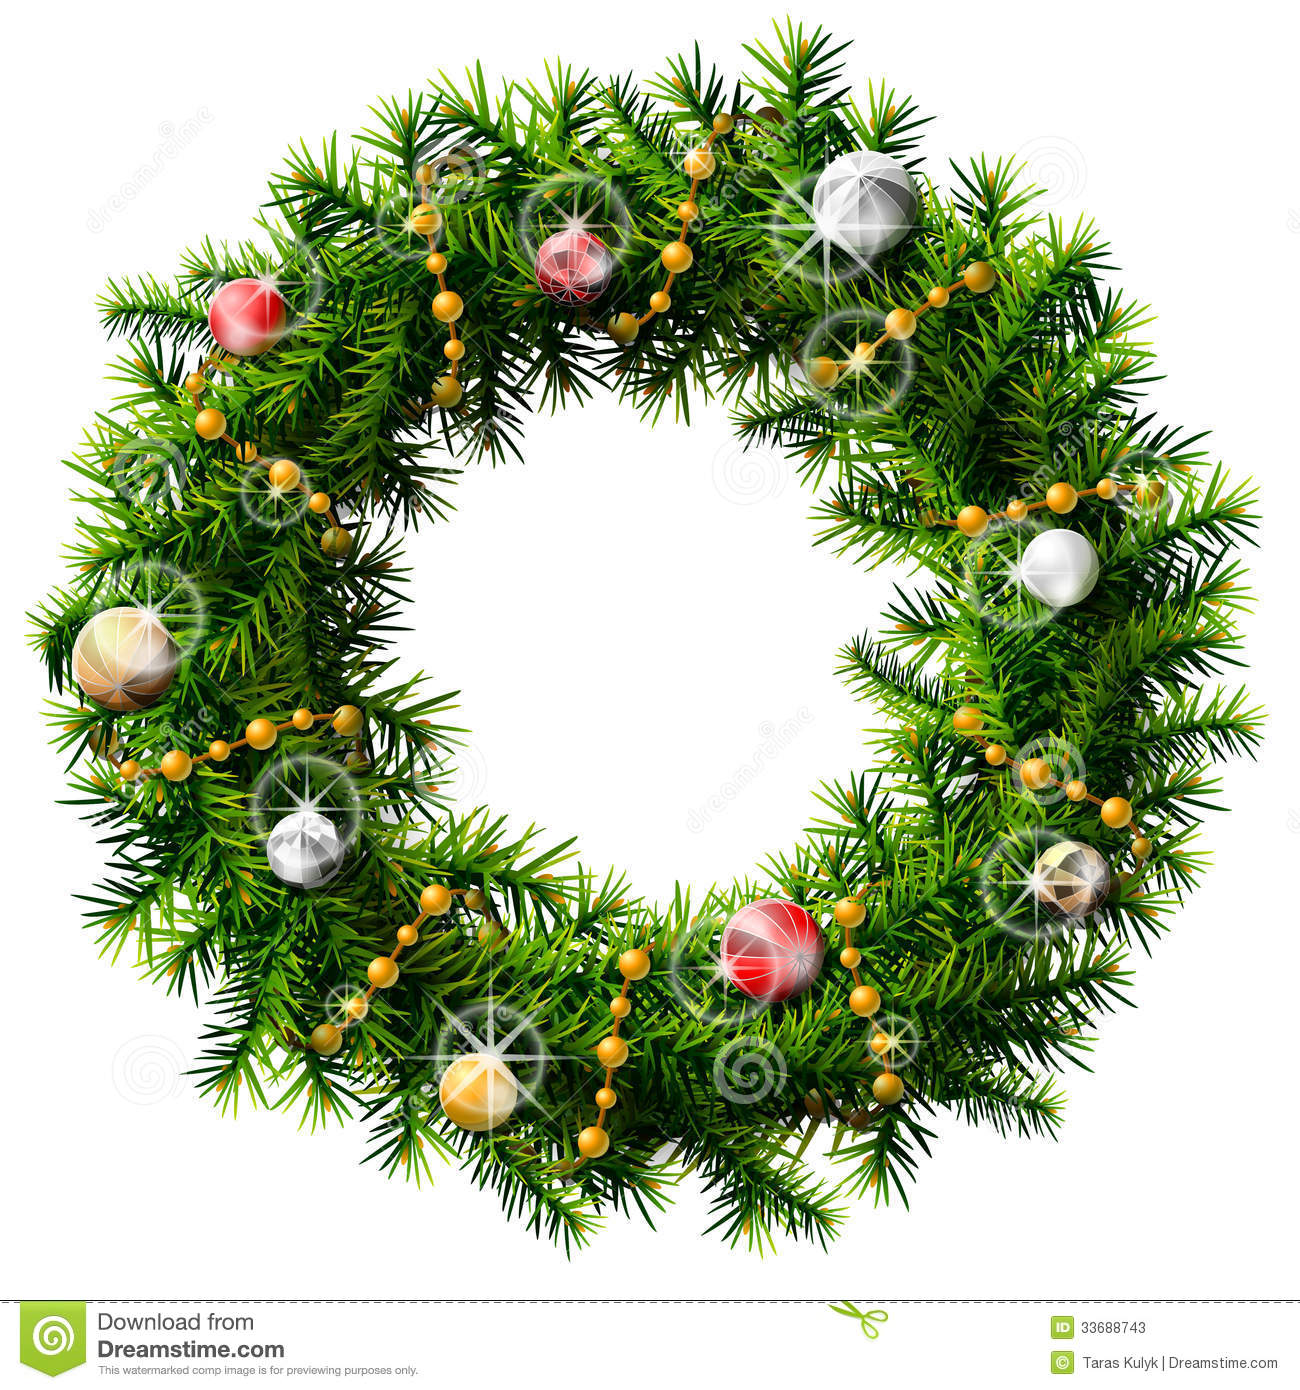 Christmas Wreath With Decorative Beads And Balls Stock Photos   Image